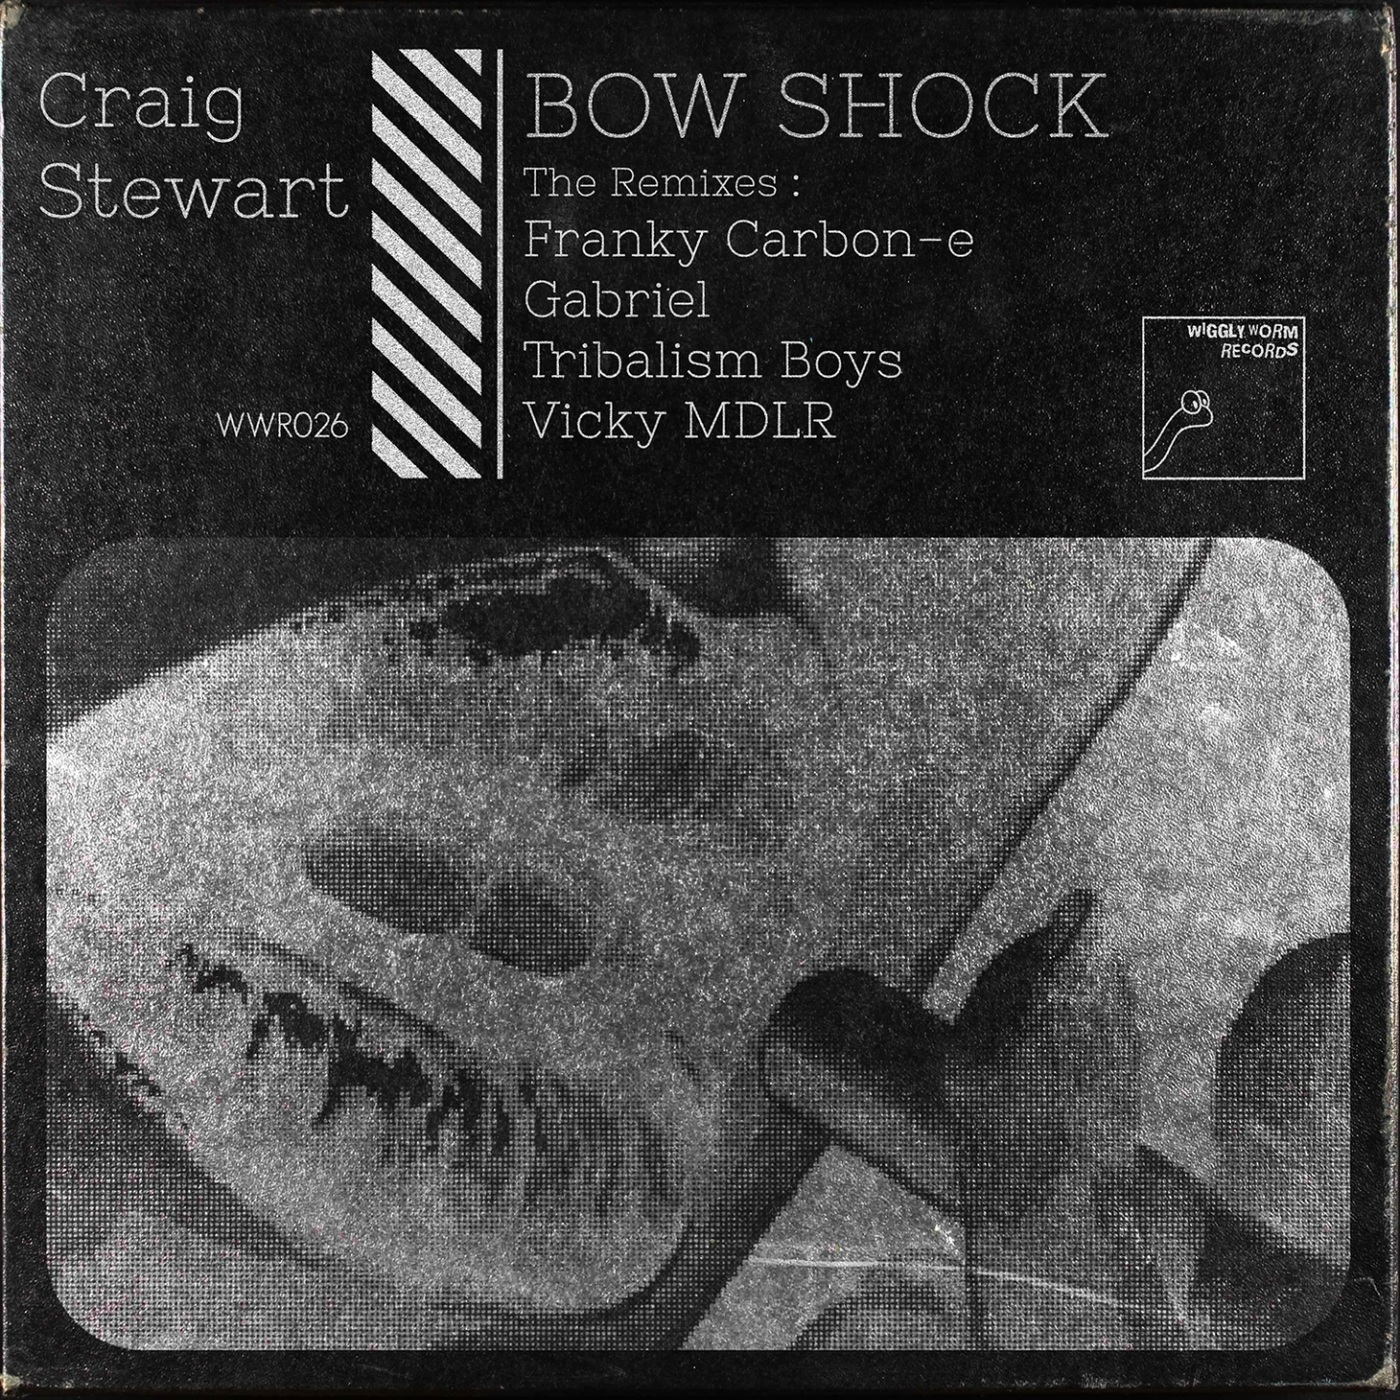 Craig Stewart - Bow Shock (The Remixes) / Wiggly Worm Records